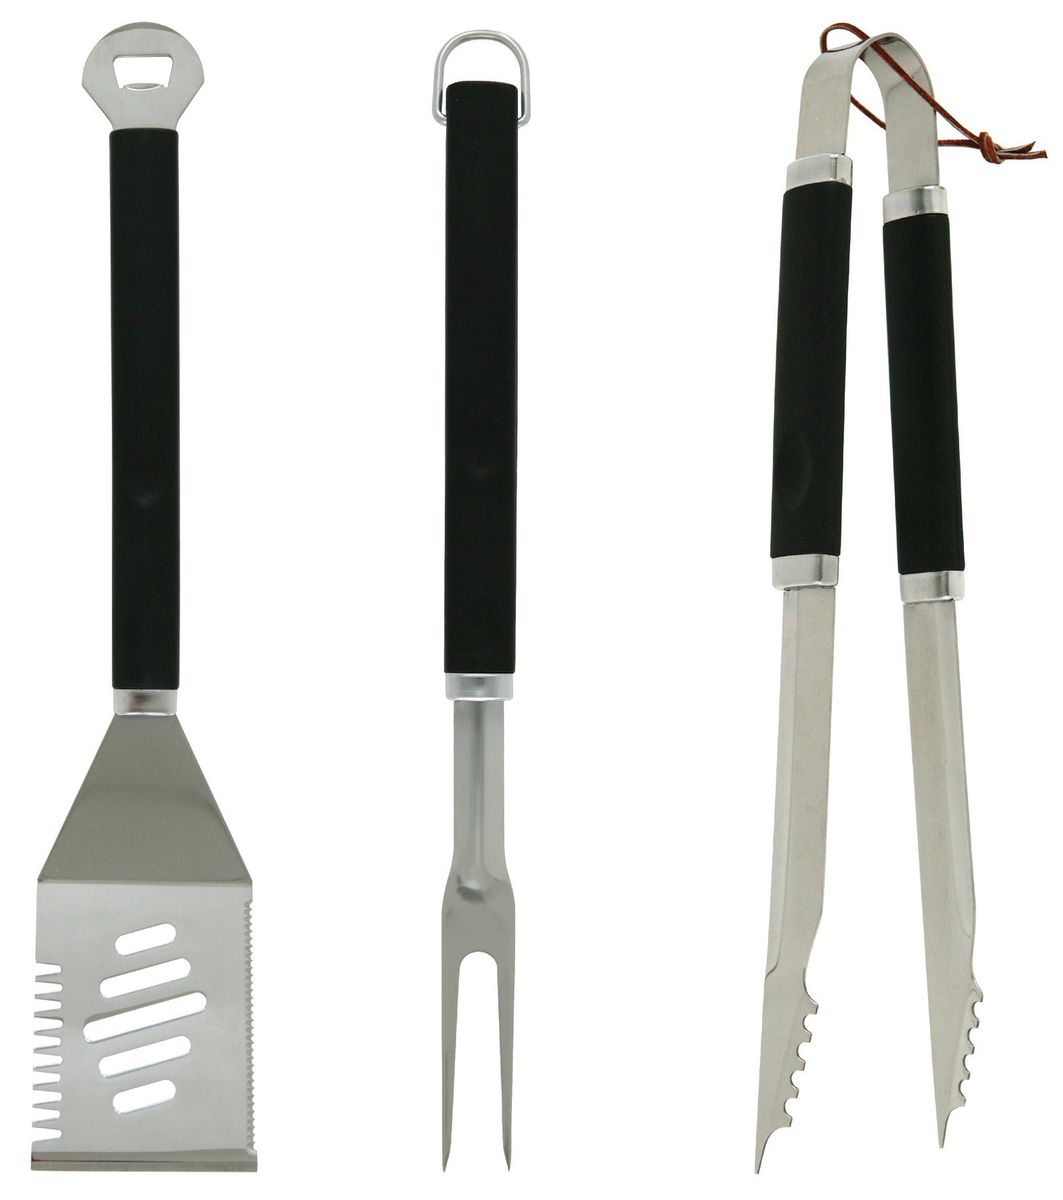 Megamaster Stainless Steel Tool Set (3 piece)